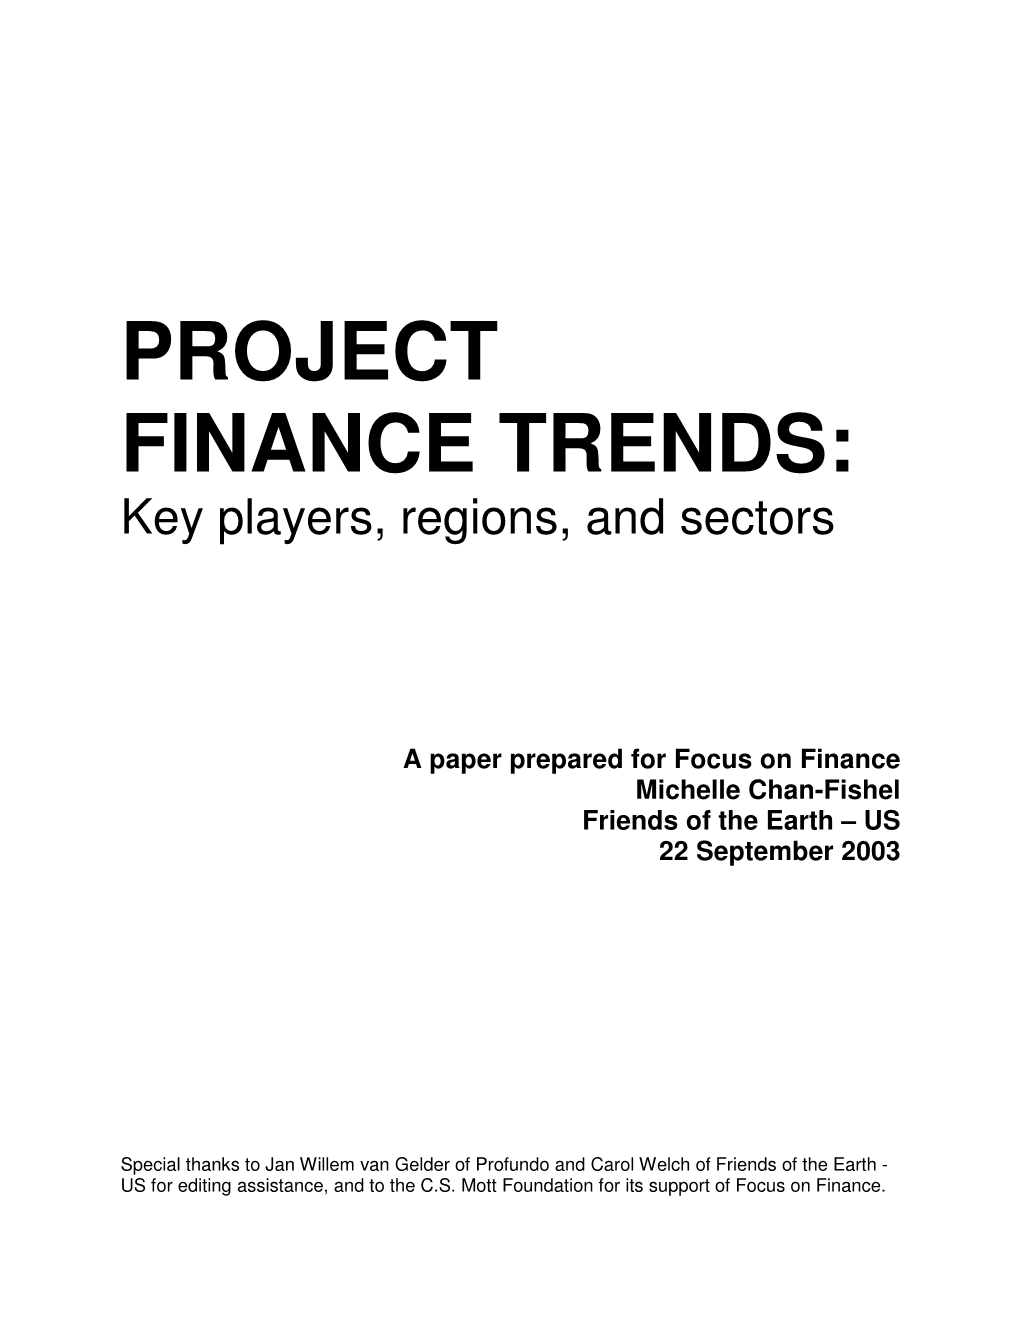 PROJECT FINANCE TRENDS: Key Players, Regions, and Sectors